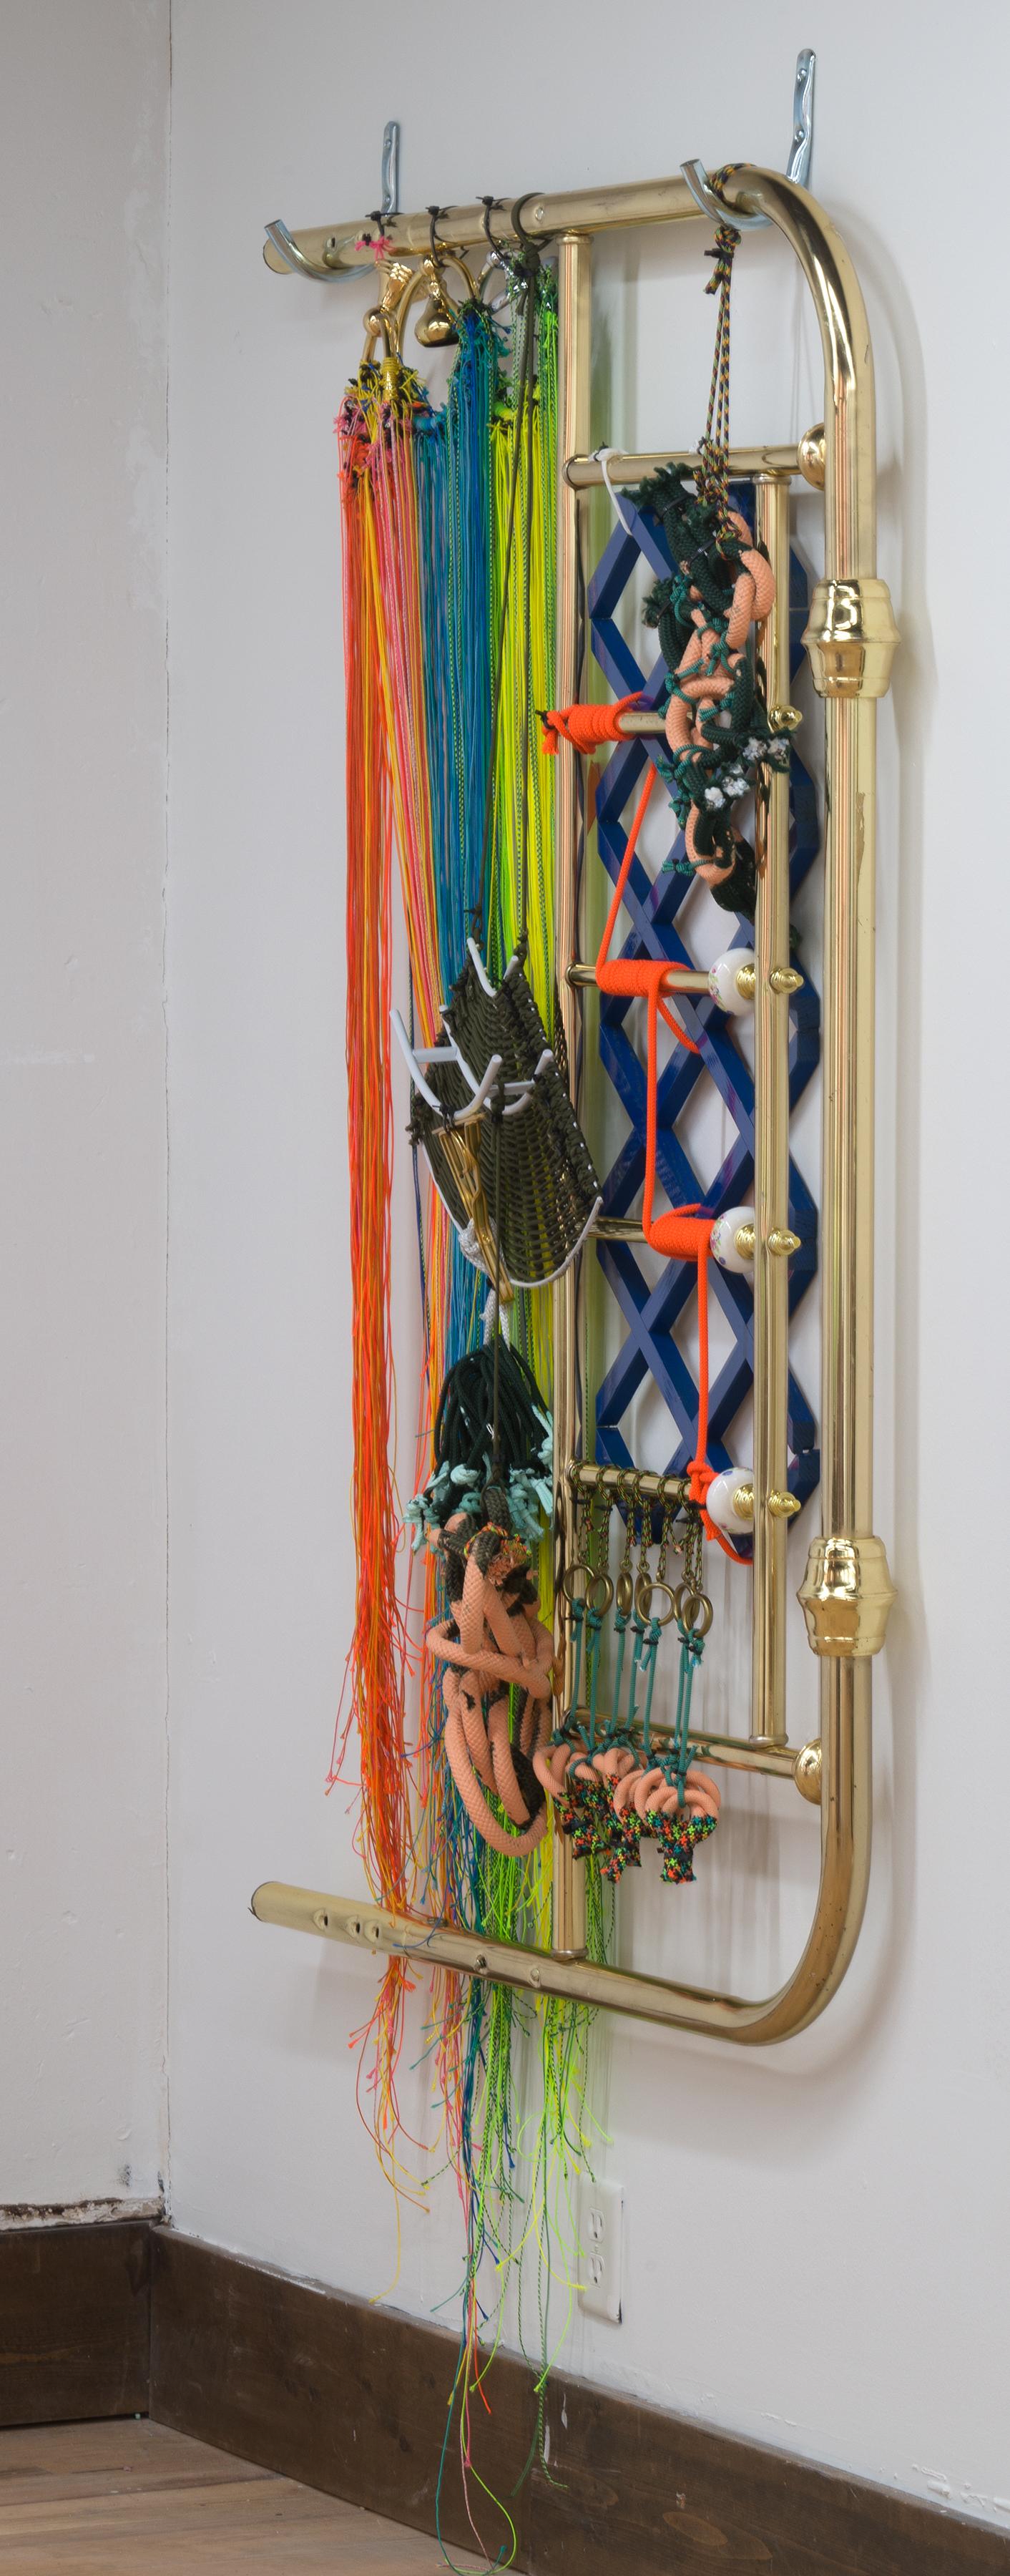 ADORNED OBSOLESCENCE 4 - Sculptural Wall Hanging w/ Found & Repurposed Objects - Sculpture by Liz Miller